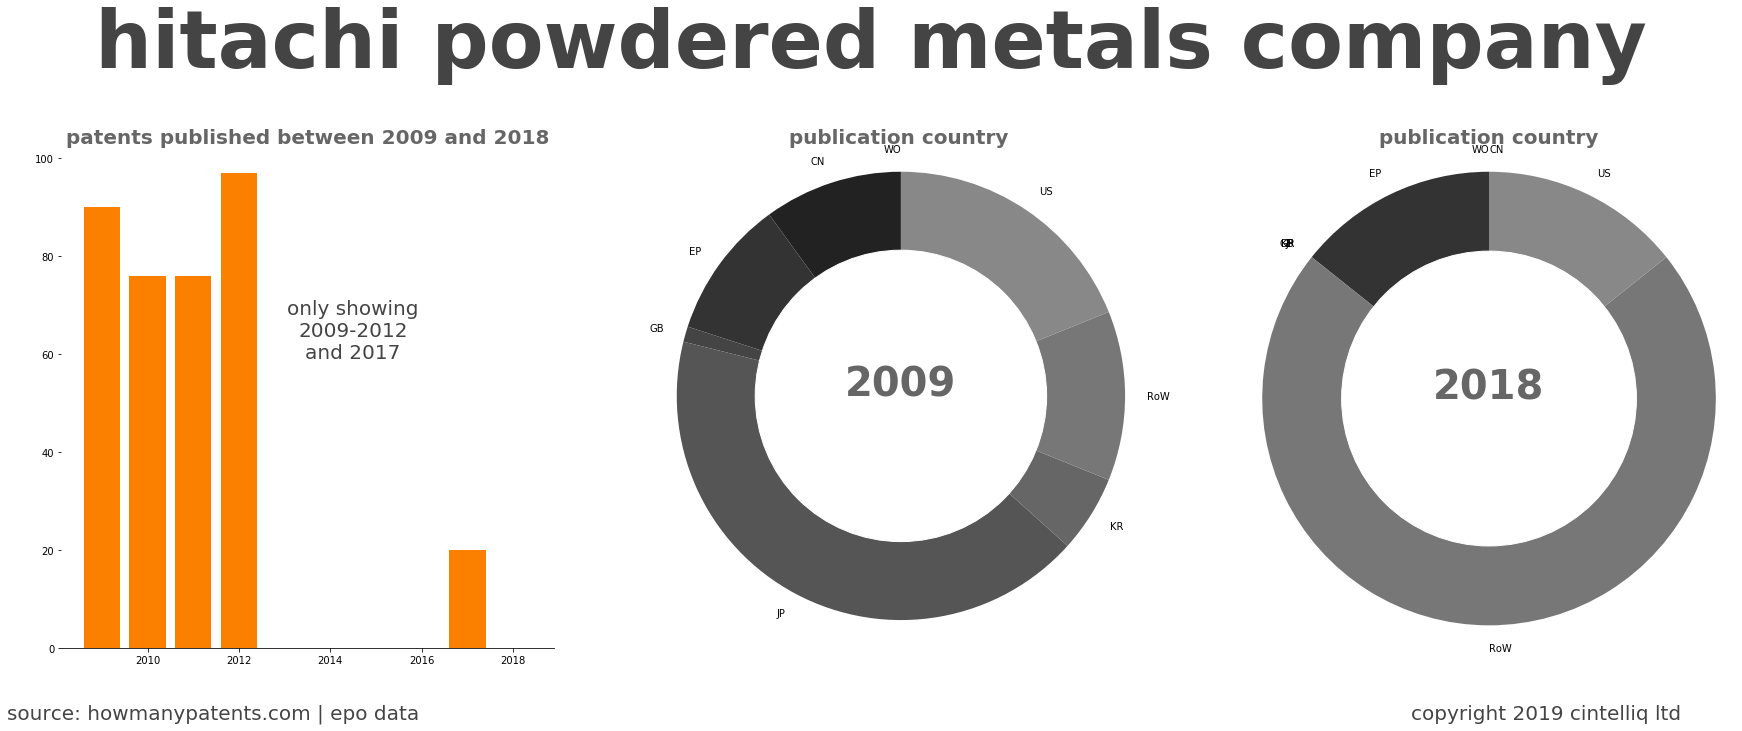 summary of patents for Hitachi Powdered Metals Company